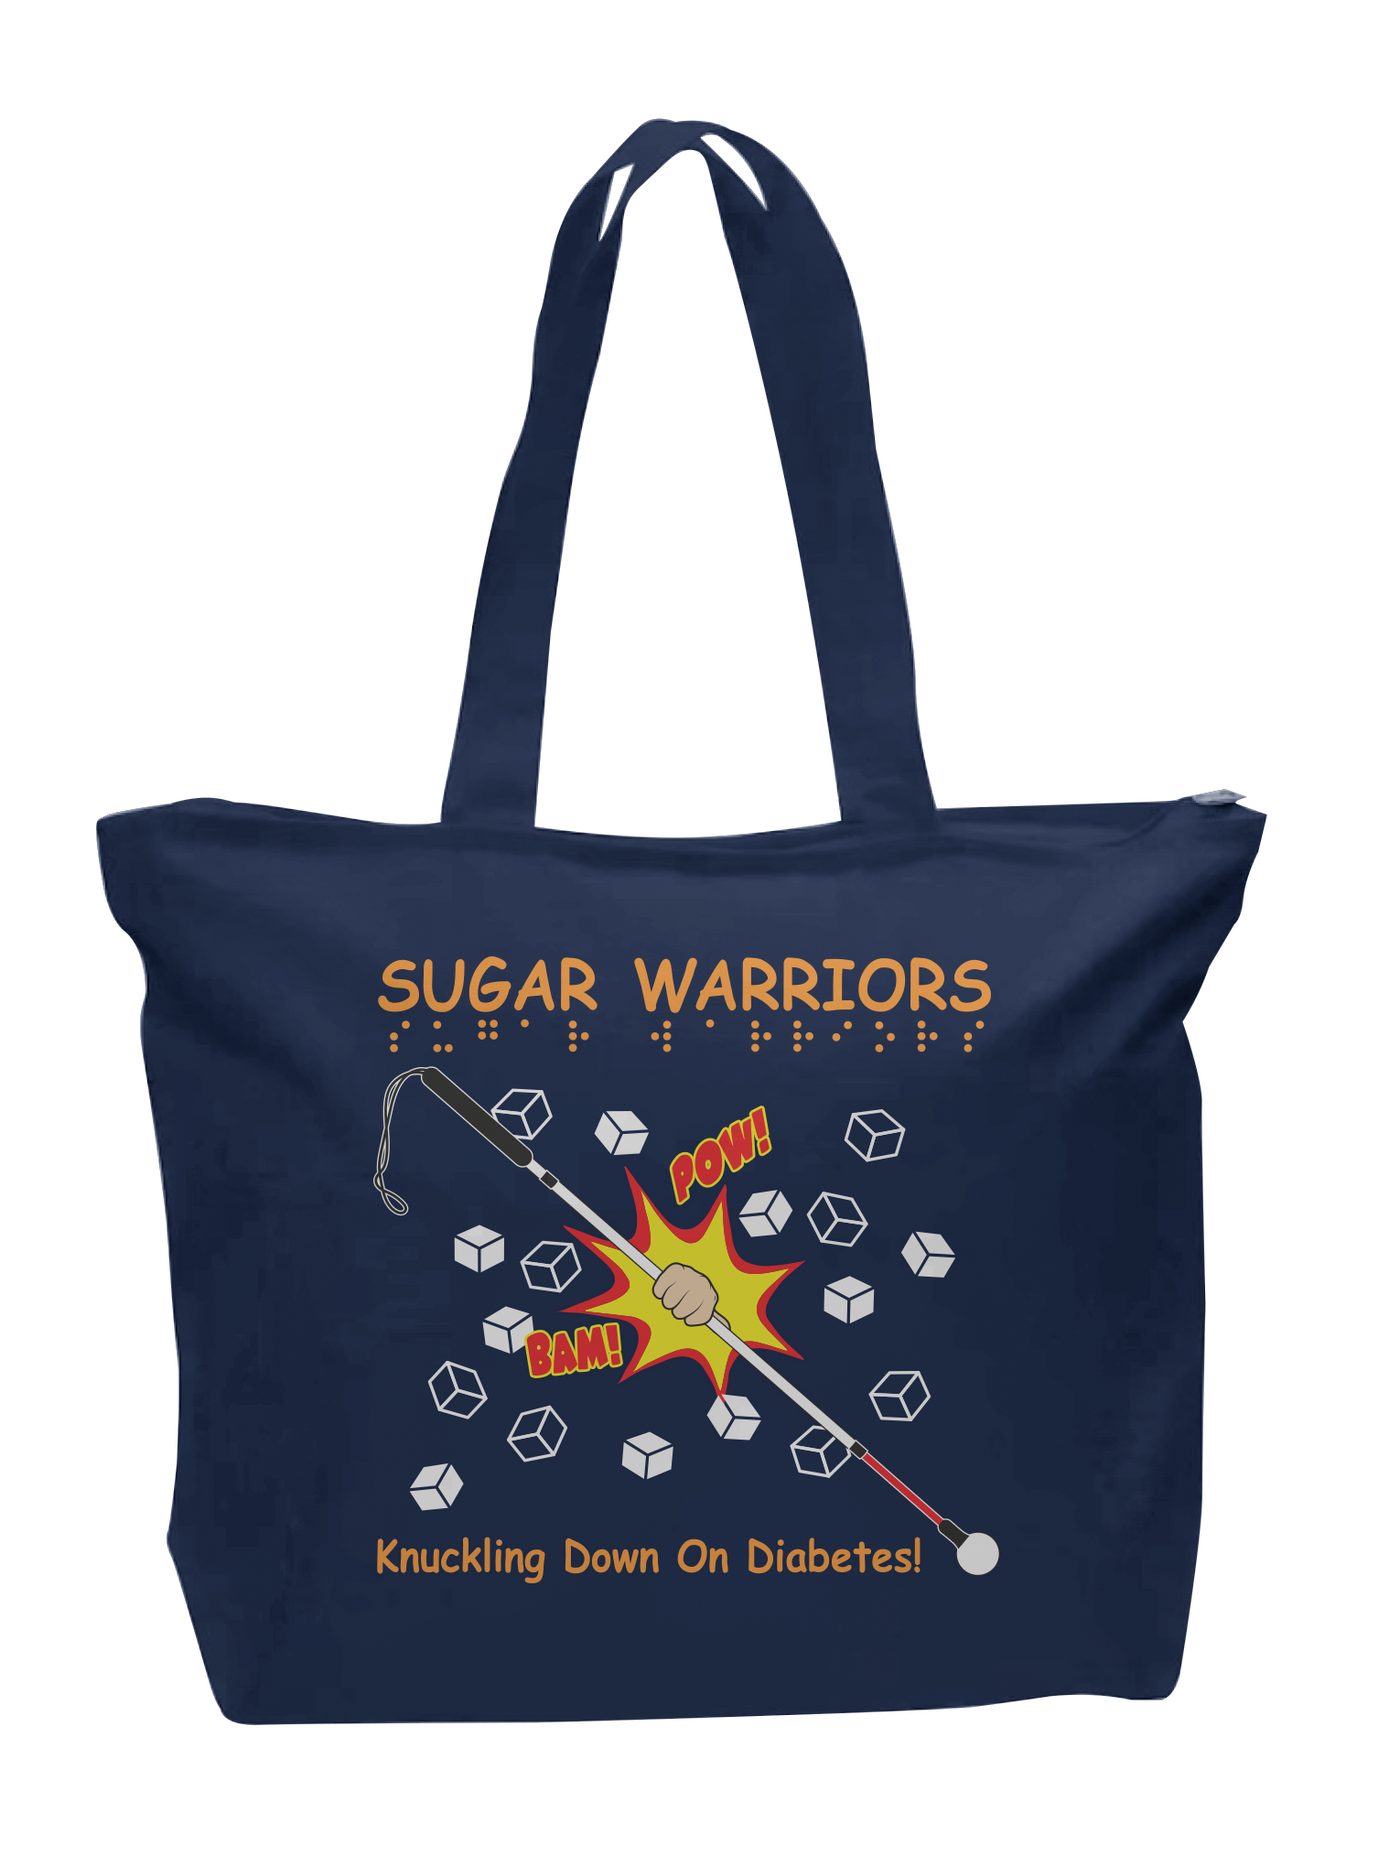 SUGAR WARRIORS is across the top in 3-D orange puff ink letters & Braille. Beneath that is a fist holding a white cane diagonally across the bag, smashing through cubes of sugar with the words, “pow”and “bam” around. “KNUCKLING DOWN ON DIABETES!” Is on the bottom of the bag in orange. ACB Diabetics in Action in white on the back.